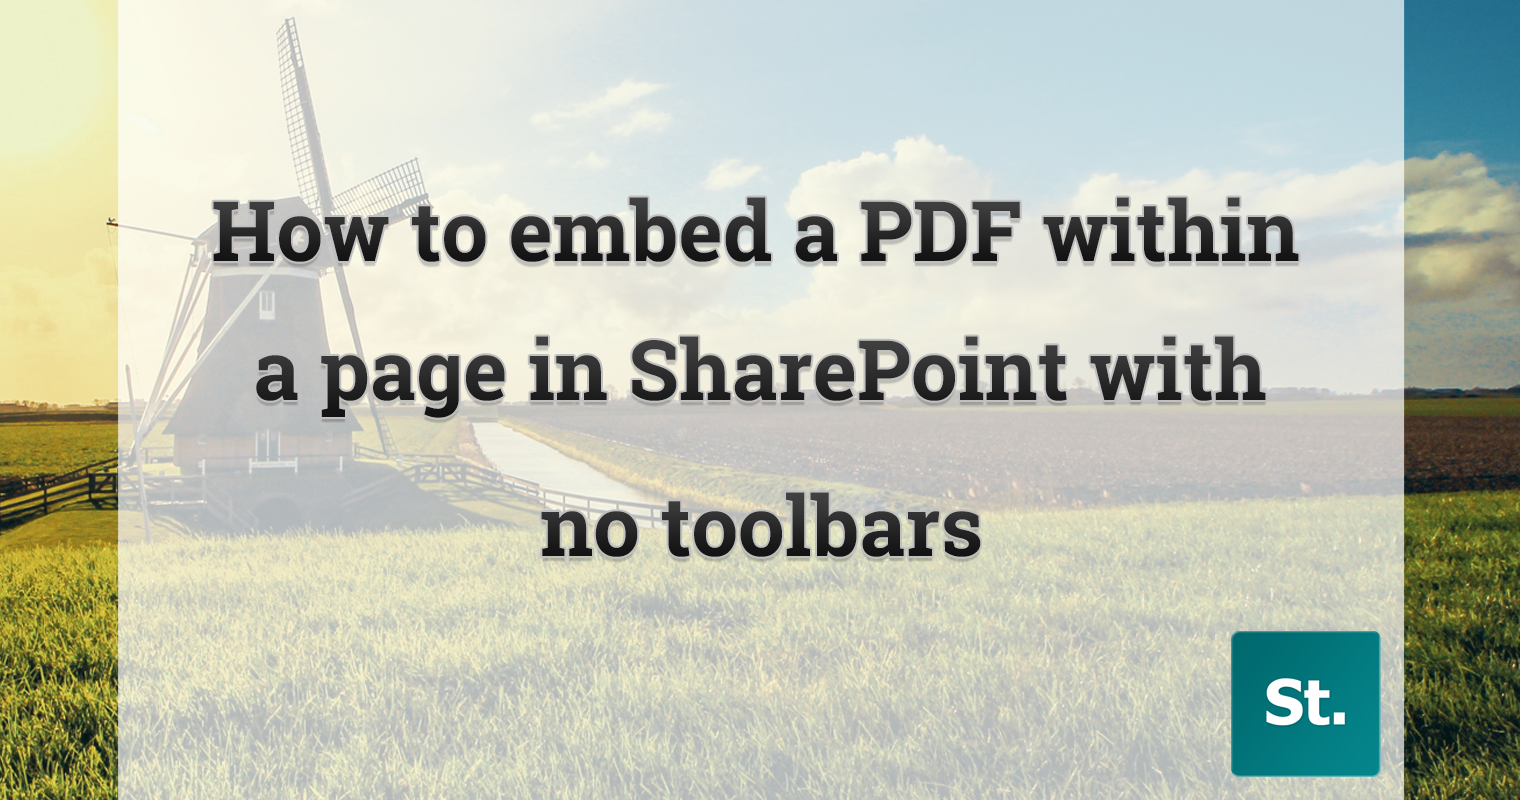 How to embed a PDF within a page with no toolbars in classic SharePoint